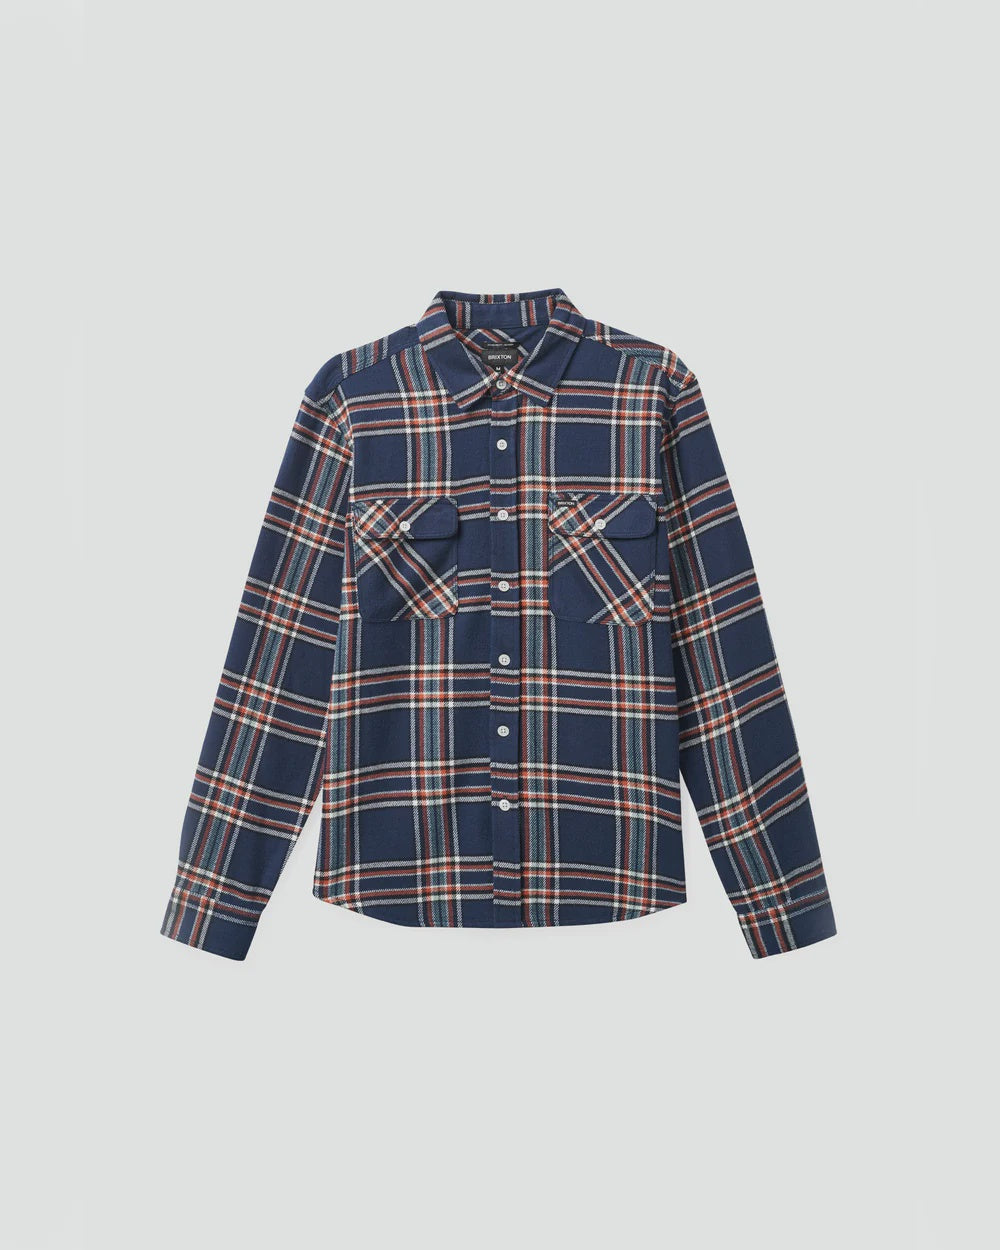 BOWERY L/S FLANNEL - WASHED NAVY